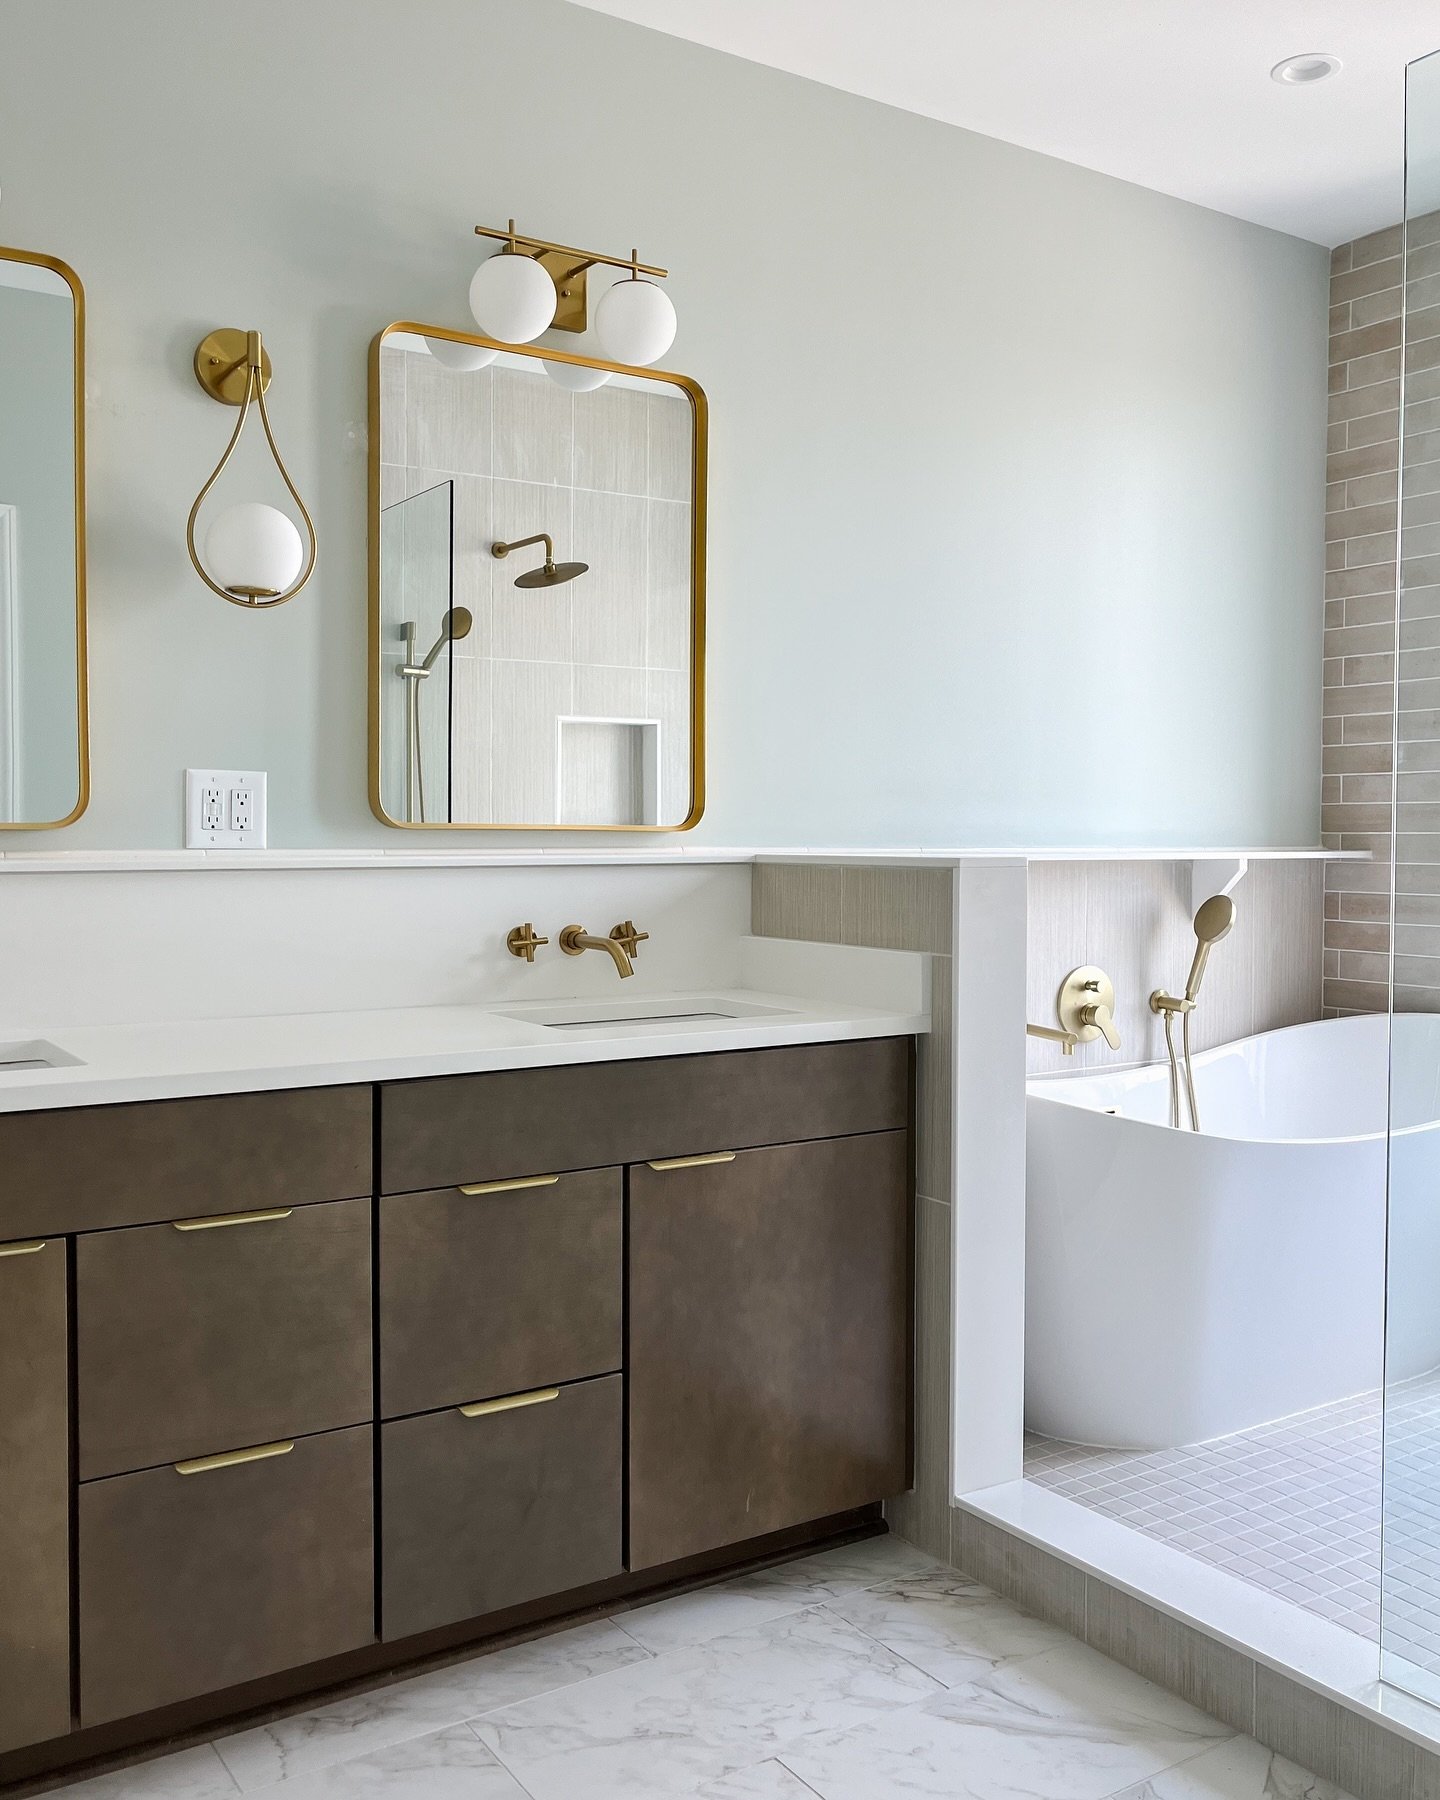 Step into elegance in this serene bathroom complete with our @waypointlivingspaces cabinetry in Maple Latte, with beautiful brass hardware and fixtures.

Ready to elevate your bathroom experience? We&rsquo;d love to help.

&mdash;
#bathroomdesign #ba